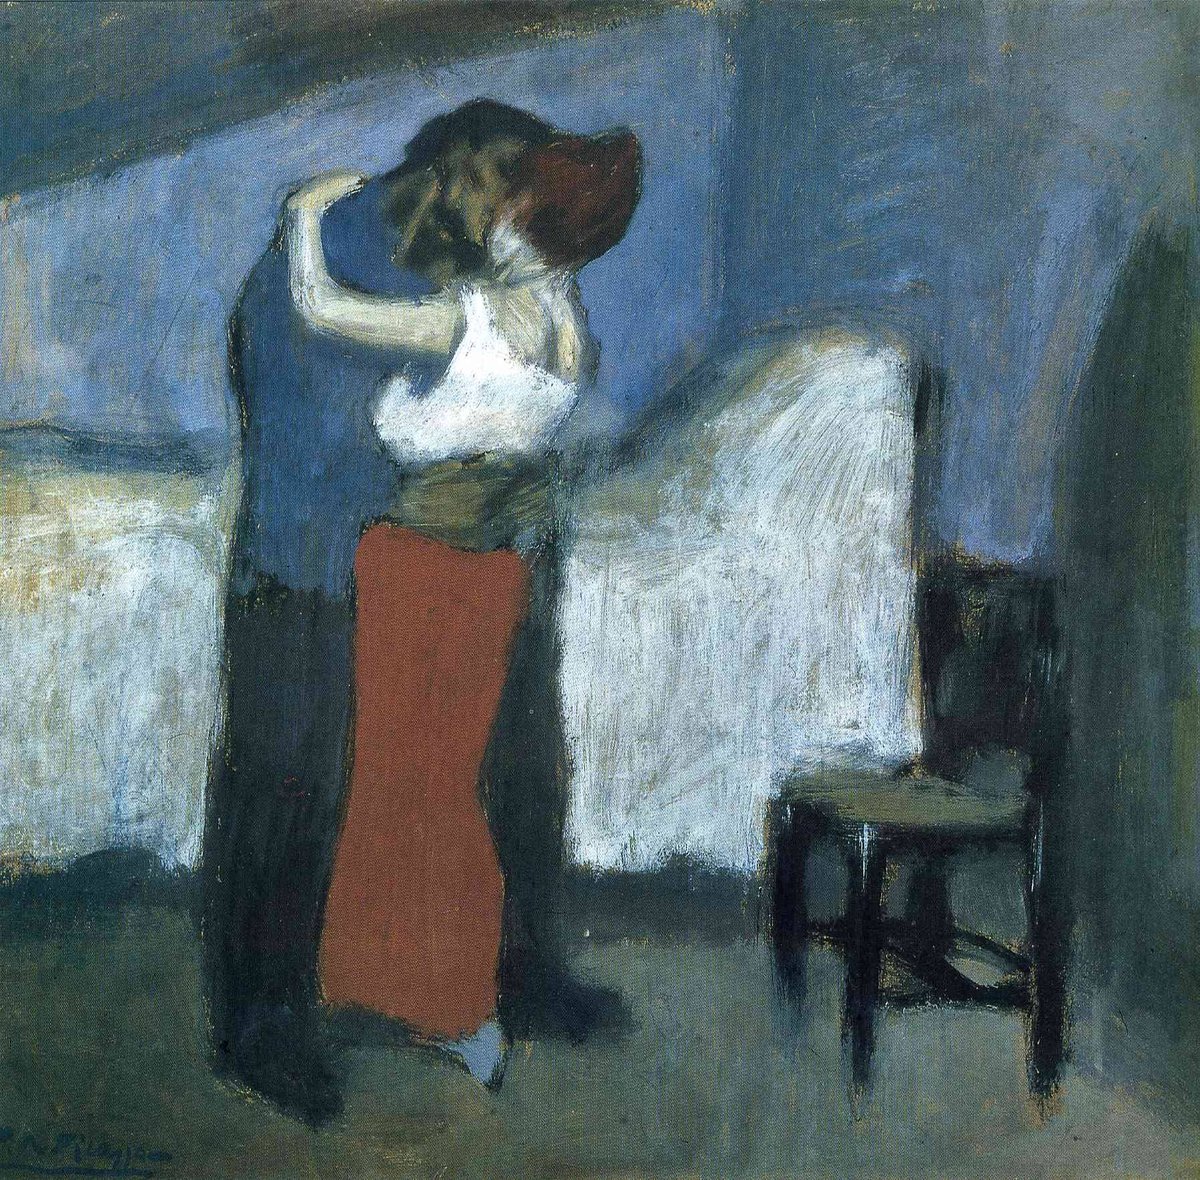 Picasso 1900 Embrace Pushkin Museum of Fine Art, Moscow, Russia